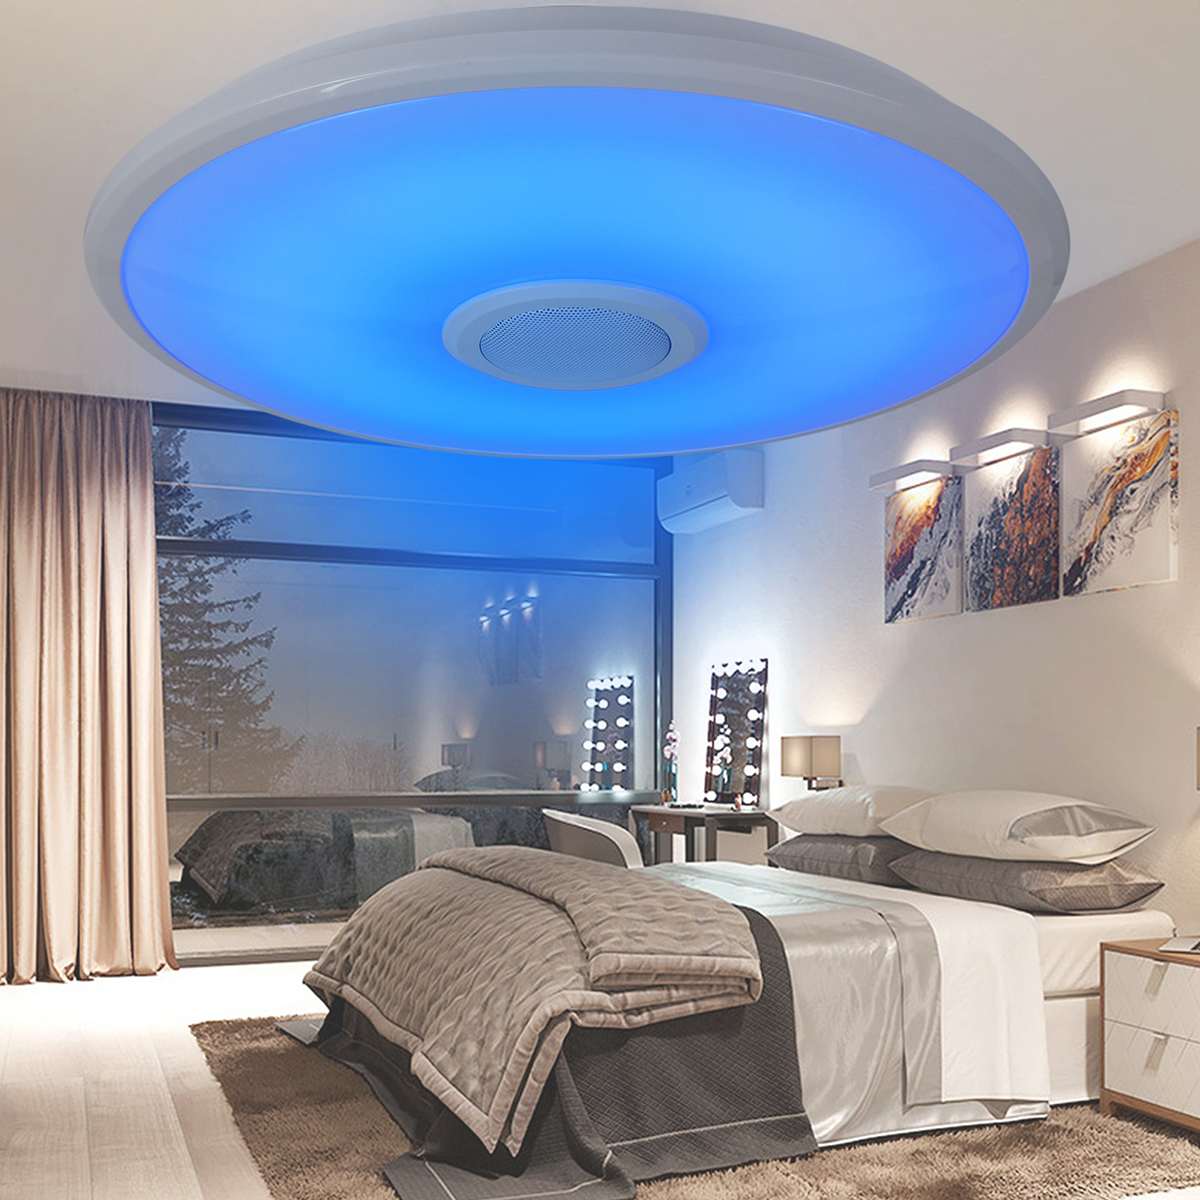 3672W-110V220V-WIFI-bluetooth-LED-Ceiling-Light-256-Color-RGB-Music-Dimmable-Lamp-Remote-1795284-12